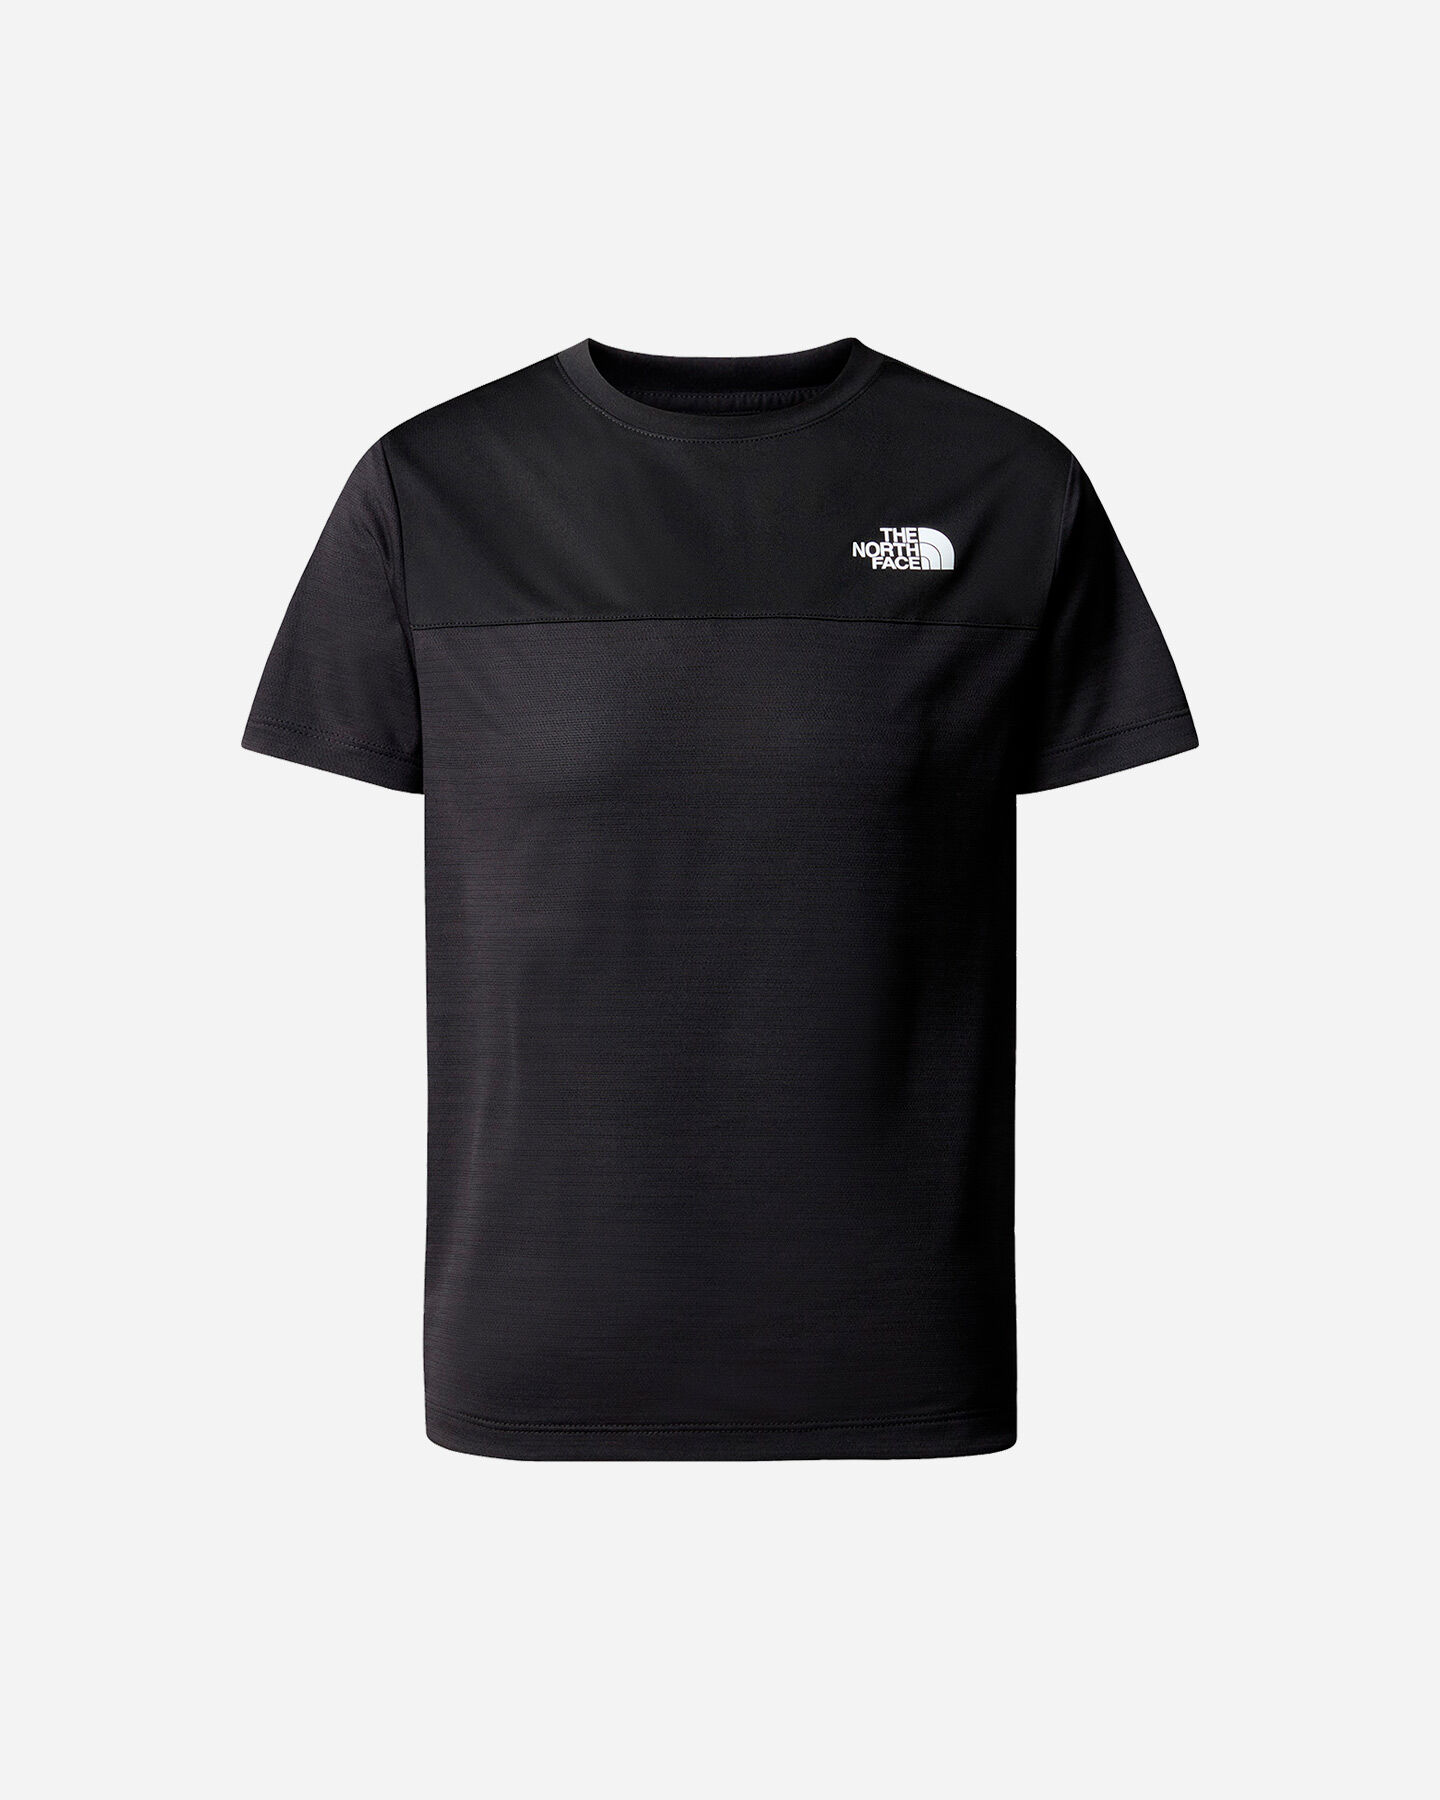  T-Shirt THE NORTH FACE NEVER STOP JR S5650321|JK3|S scatto 0